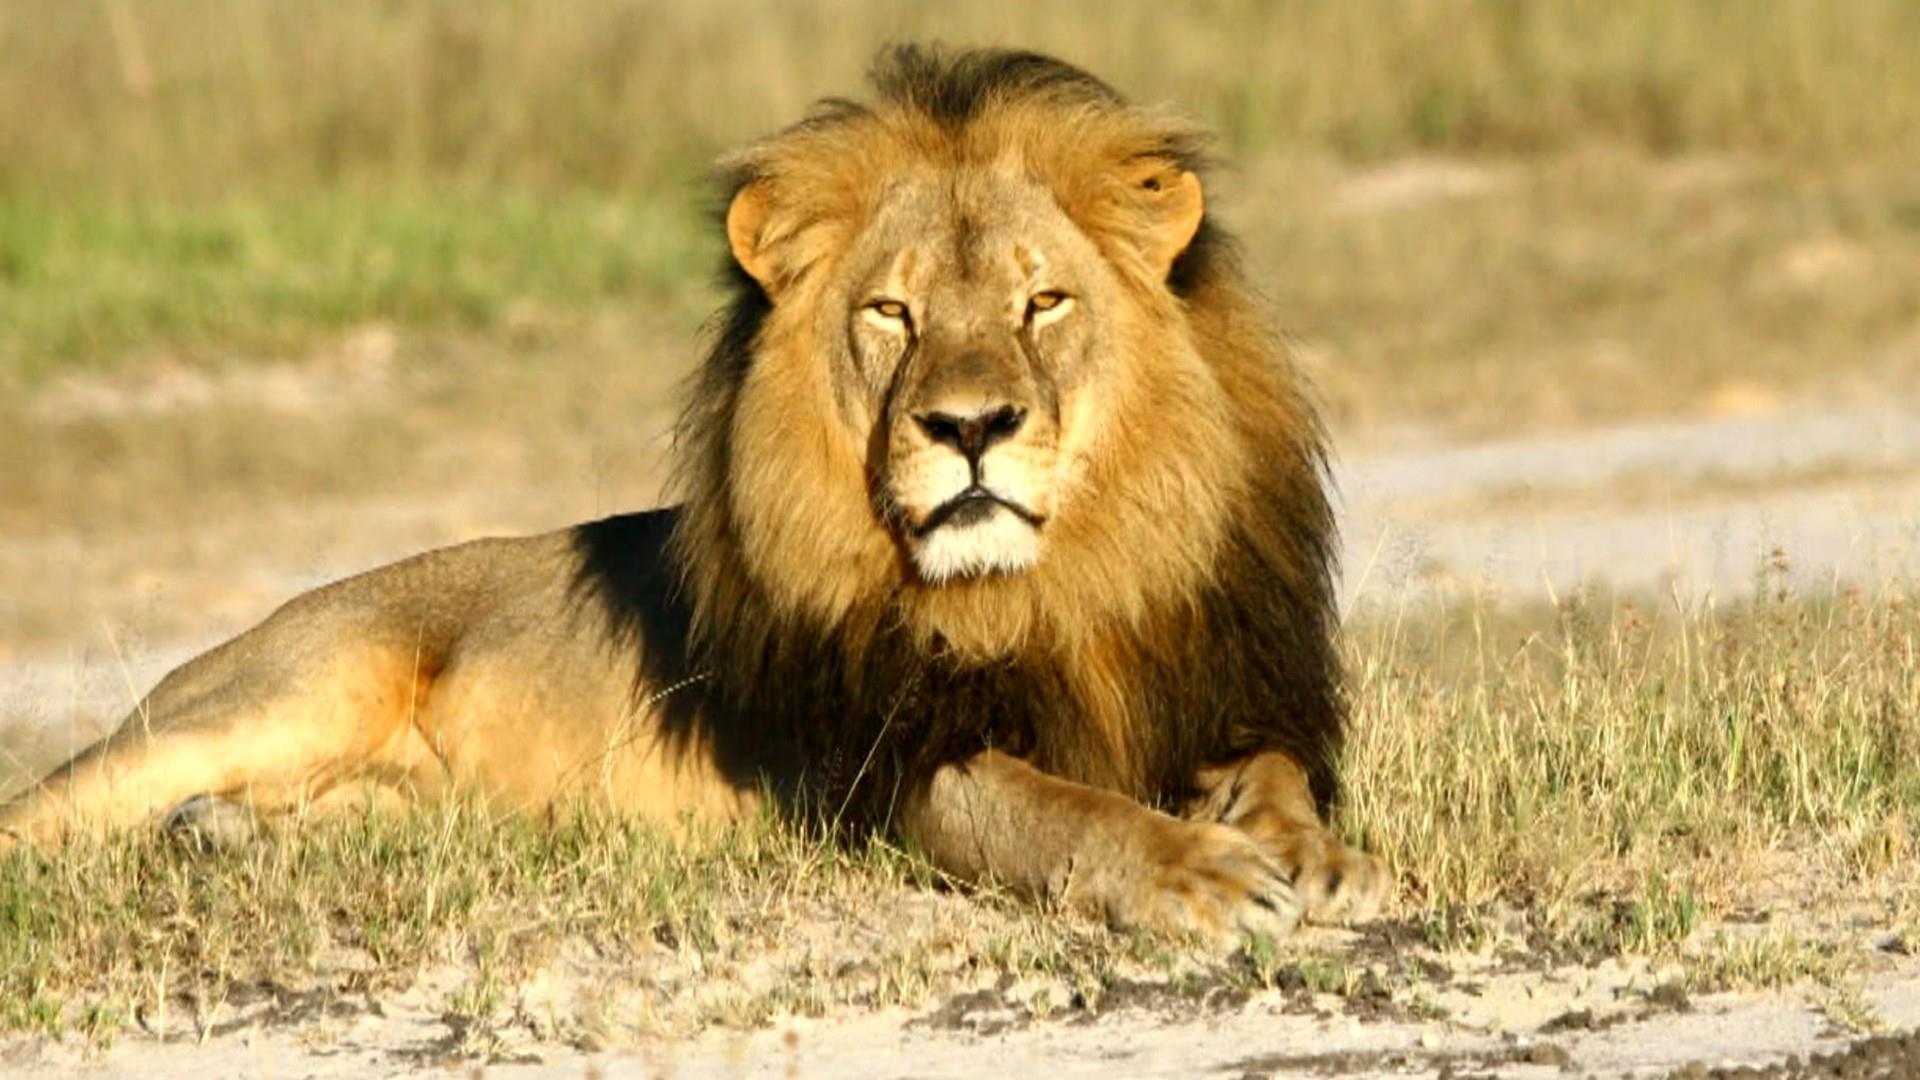 Cecil the lion's death: What really happened